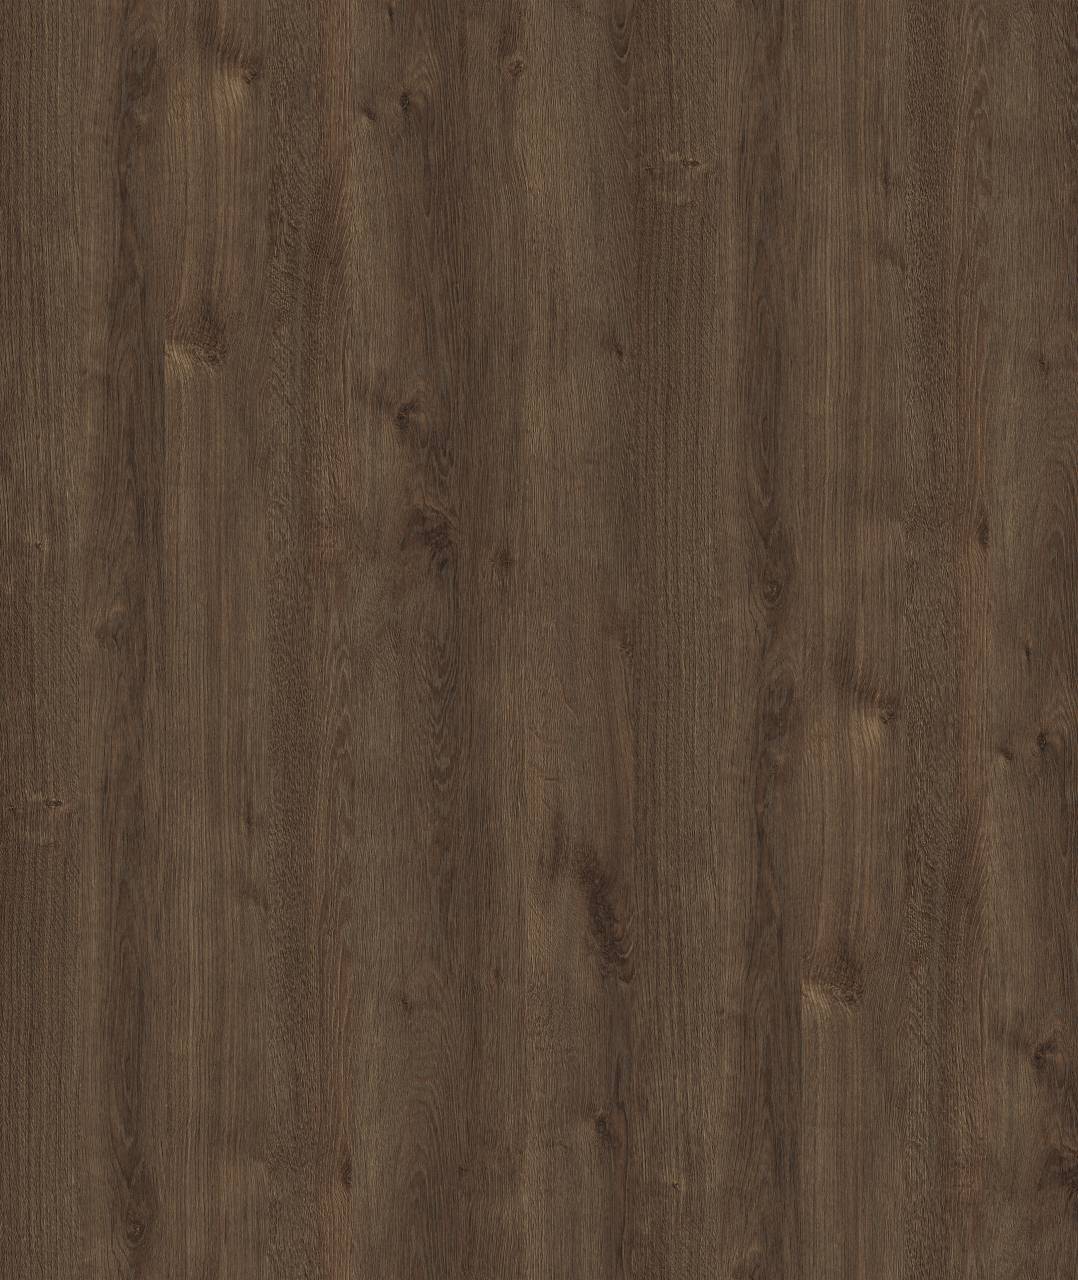 Bronze Expressive Oak PW HPL with textured surface and warm brown tones for a luxurious and elegant look.